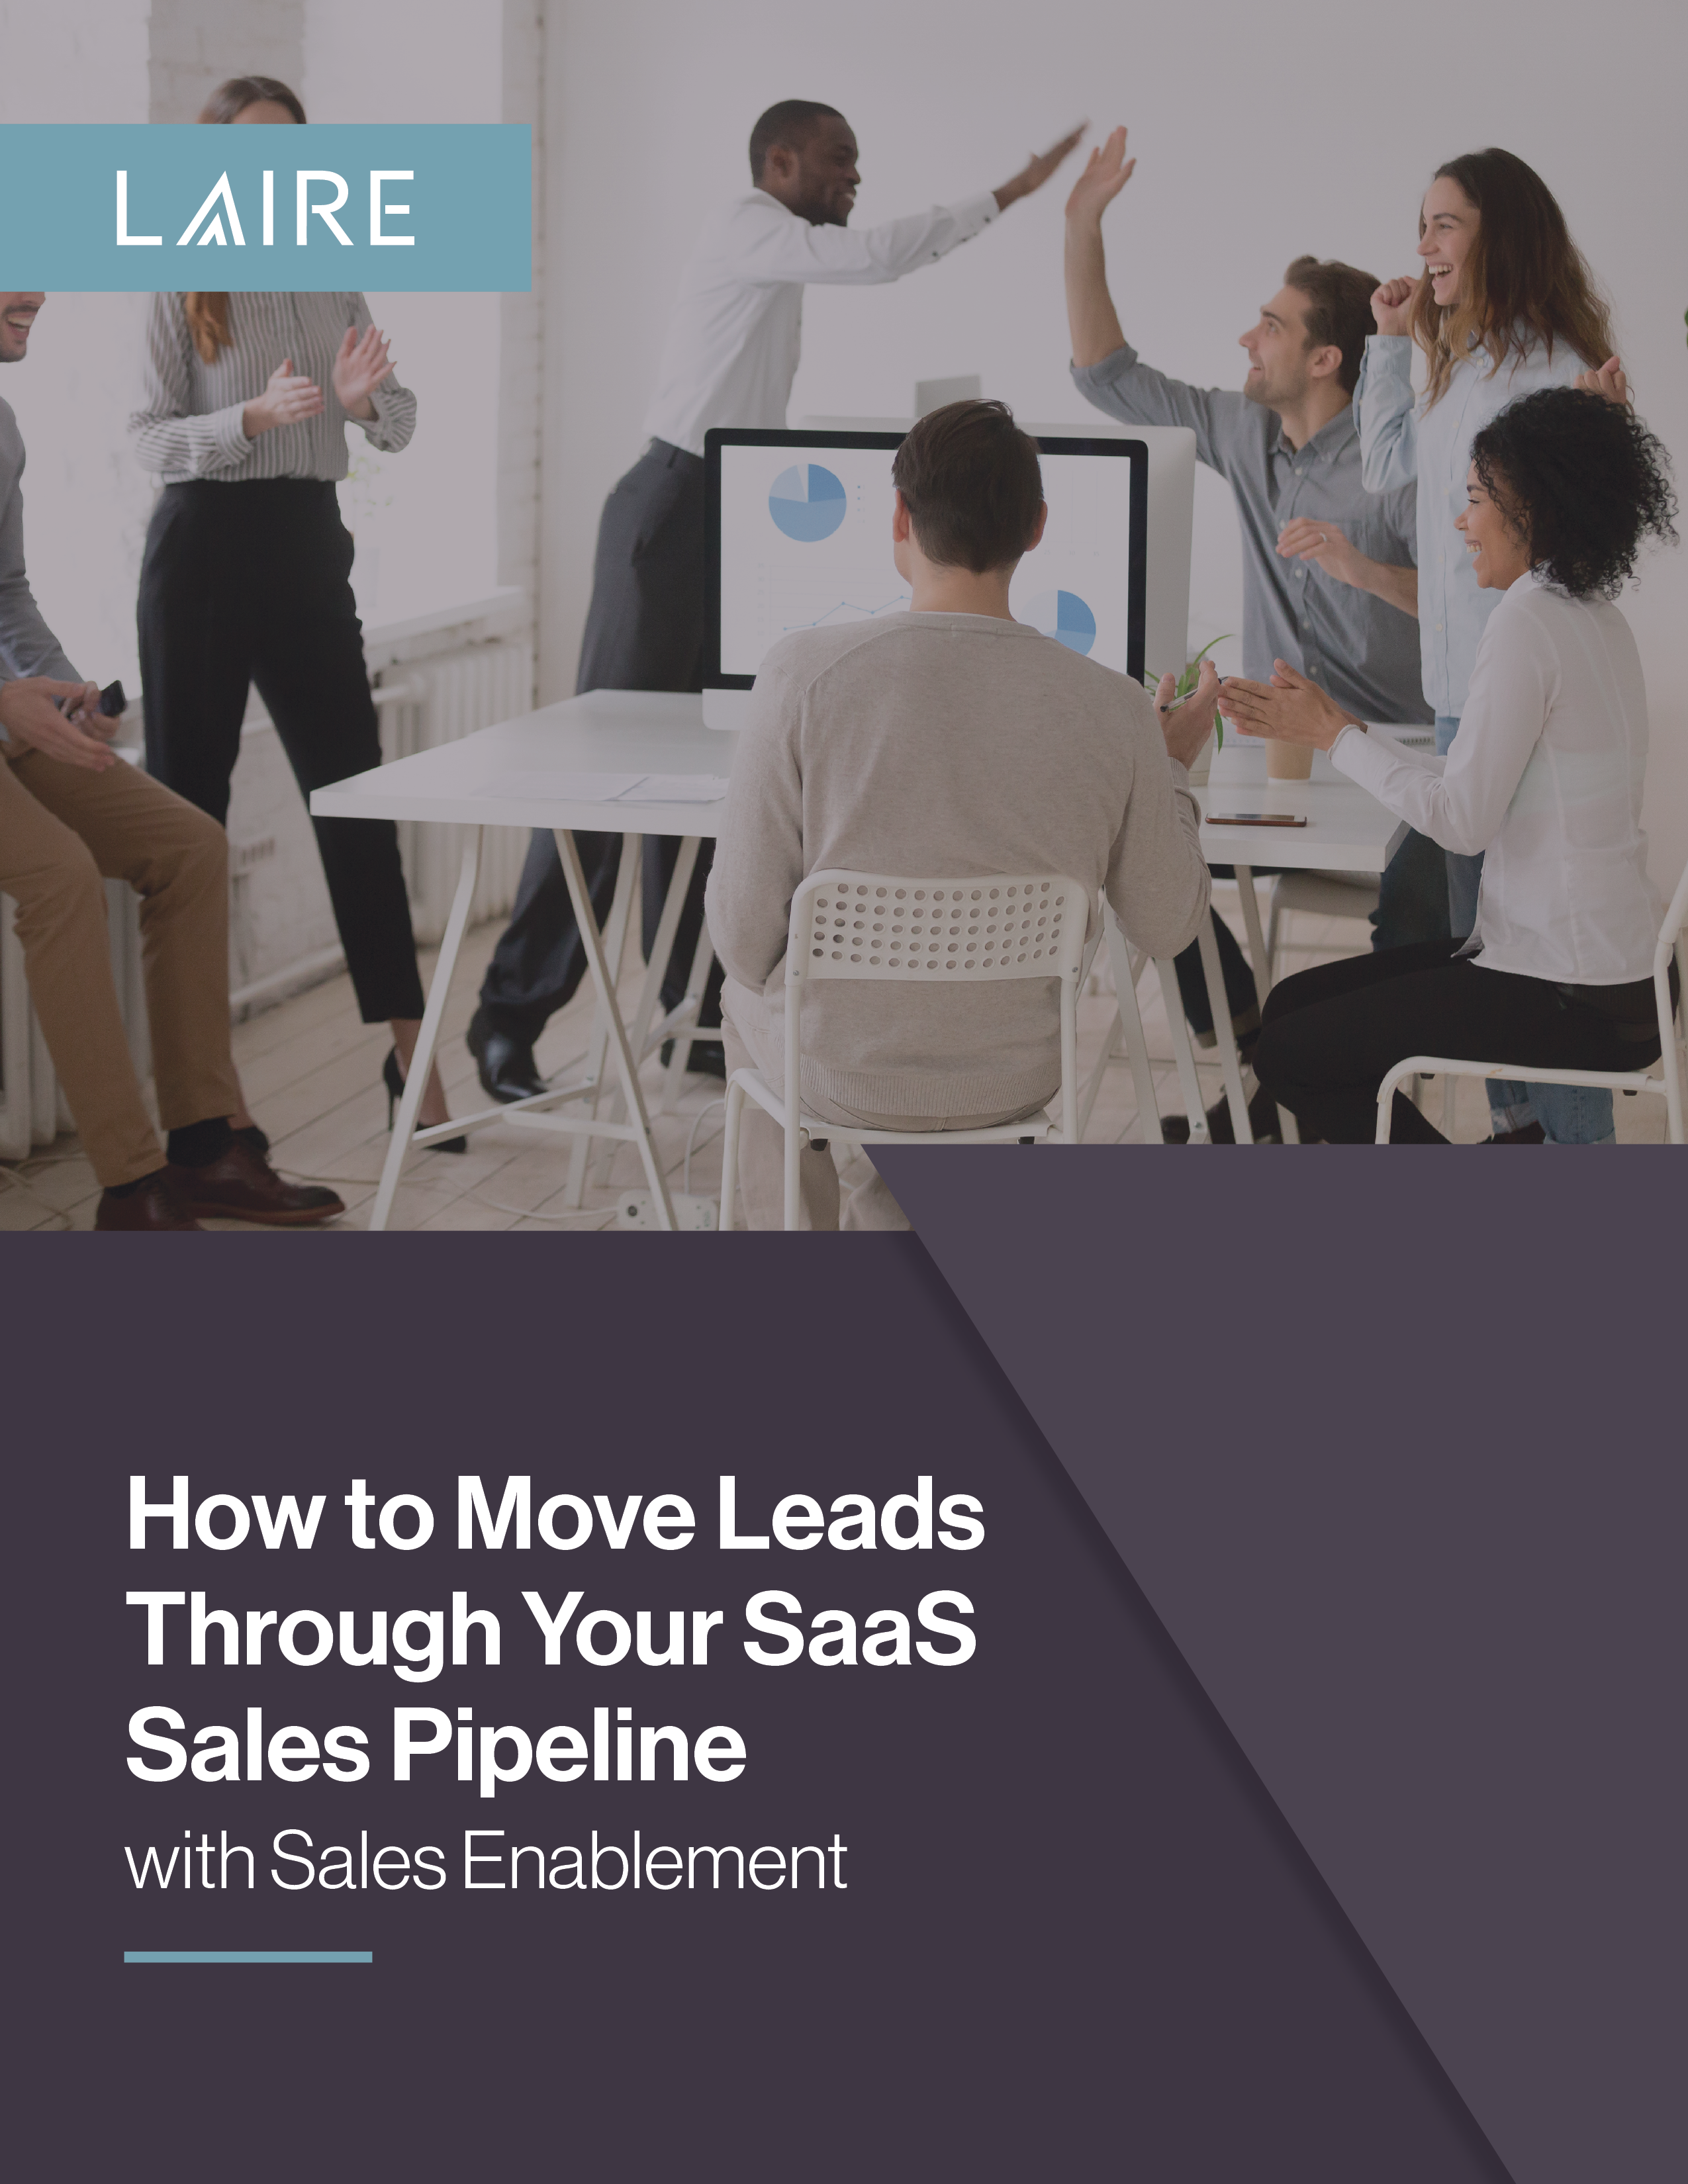 Sales Enablement for your SaaS Pipeline